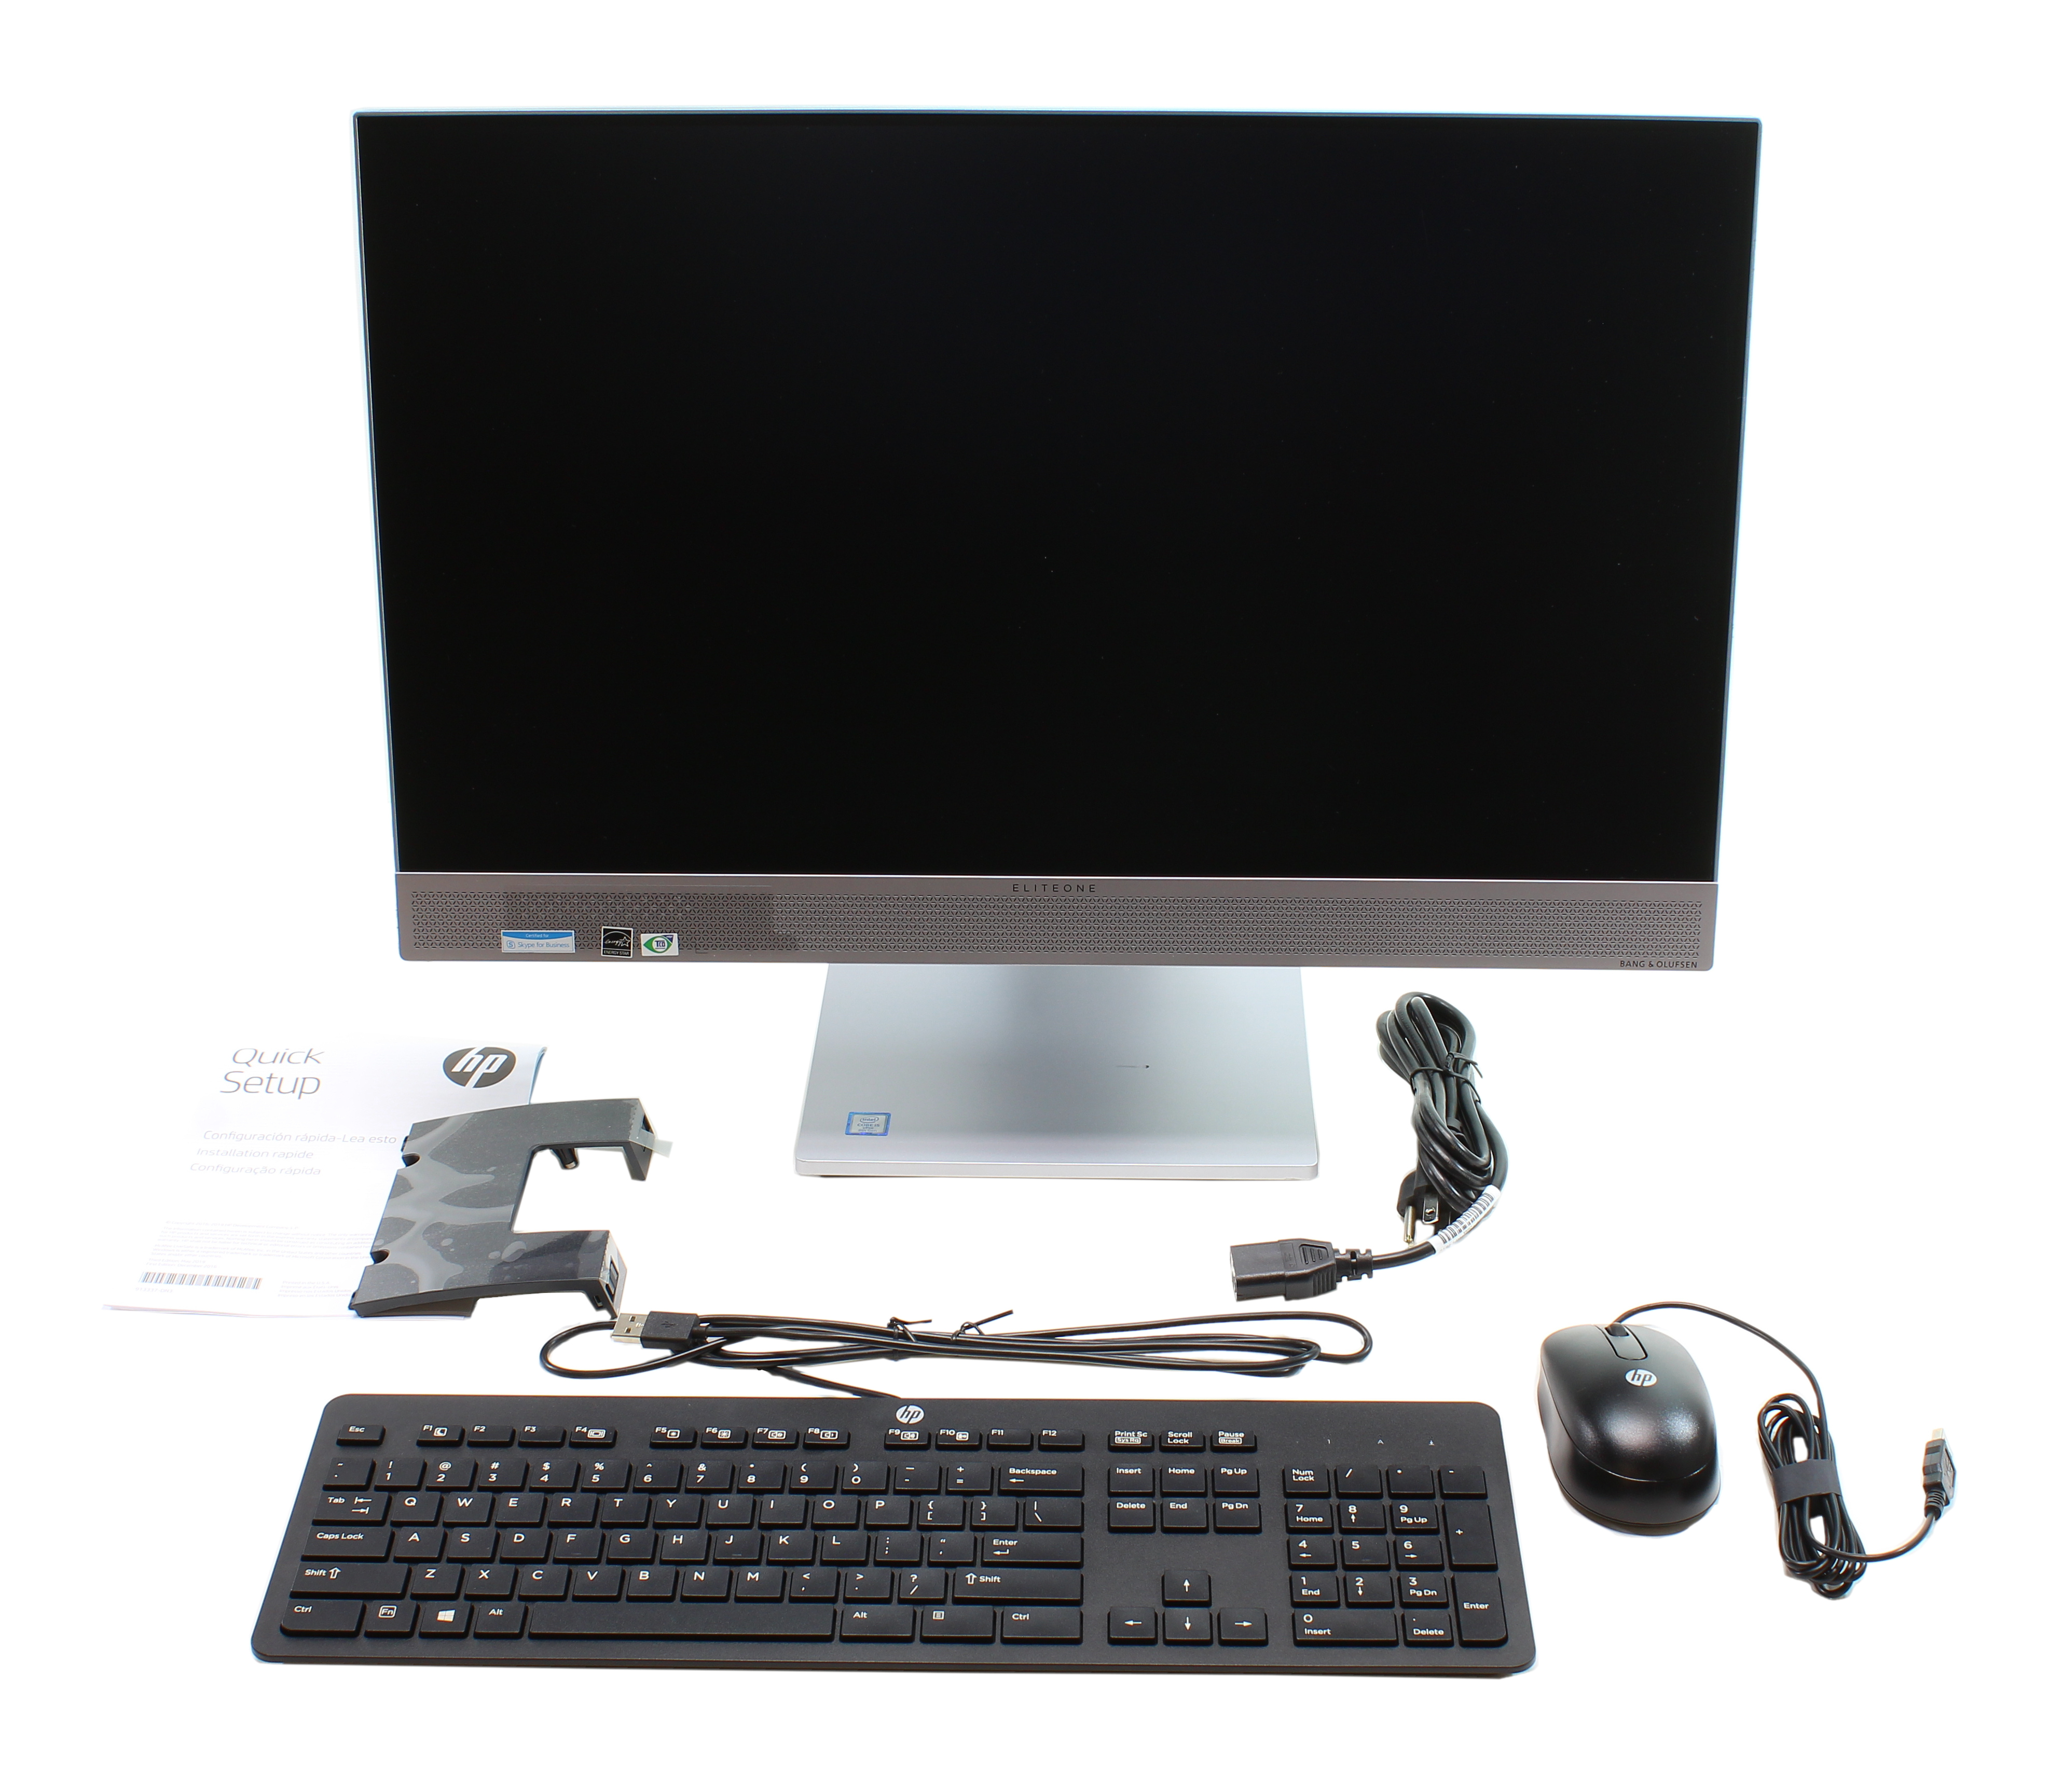 HP SB EliteOne 800 G4 Touch AIO 23.8" i5-8500 3GHz RAM 8GB SSD 256GB 4HV78UT#ABA - Click Image to Close